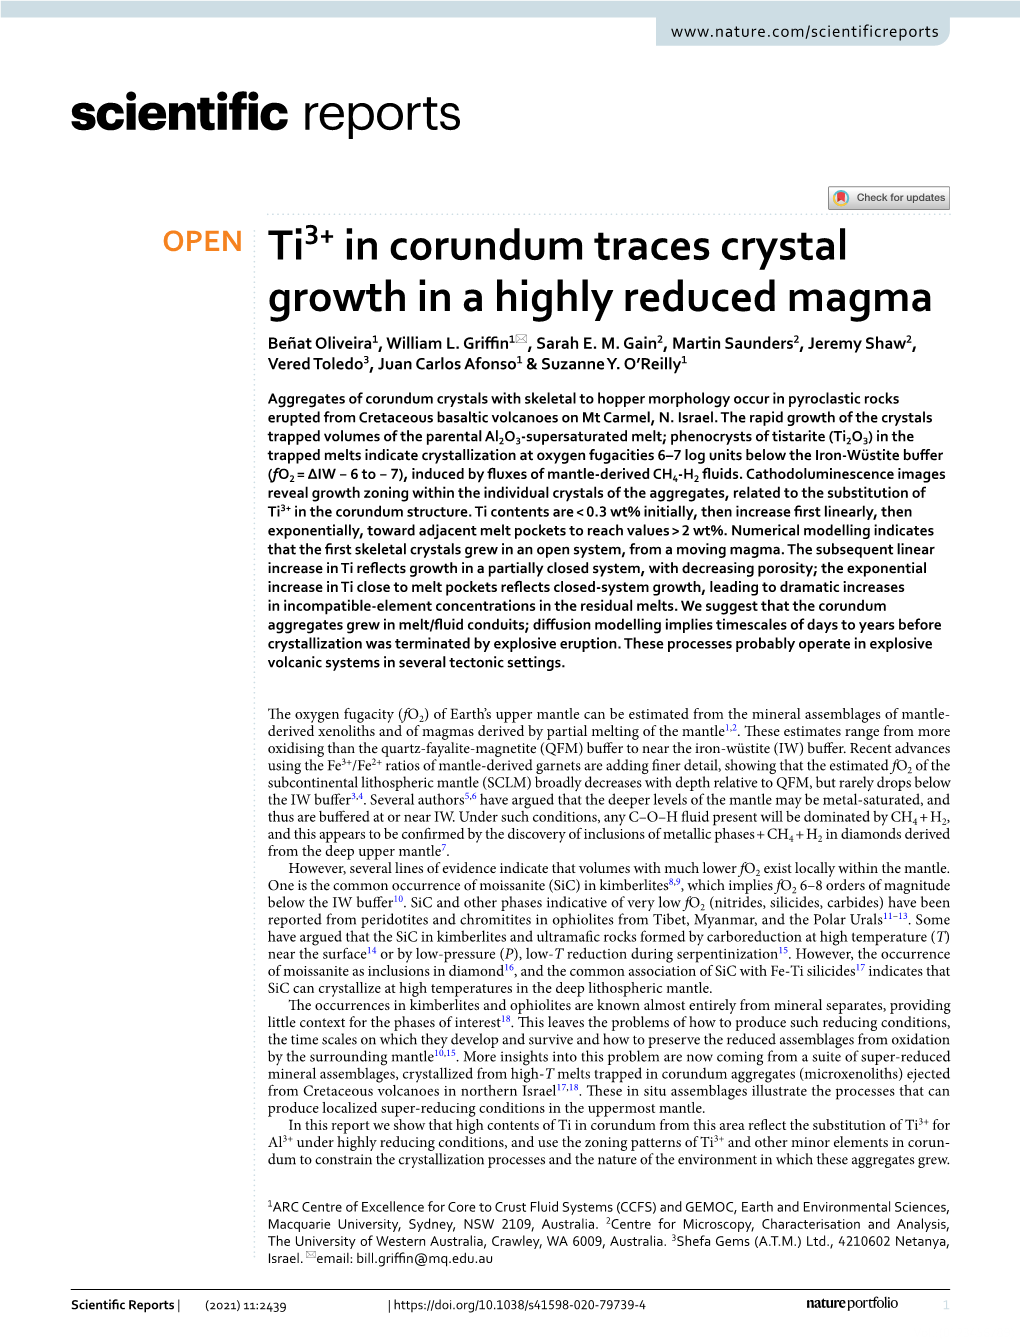 Ti3+ in Corundum Traces Crystal Growth in a Highly Reduced Magma Beñat Oliveira1, William L